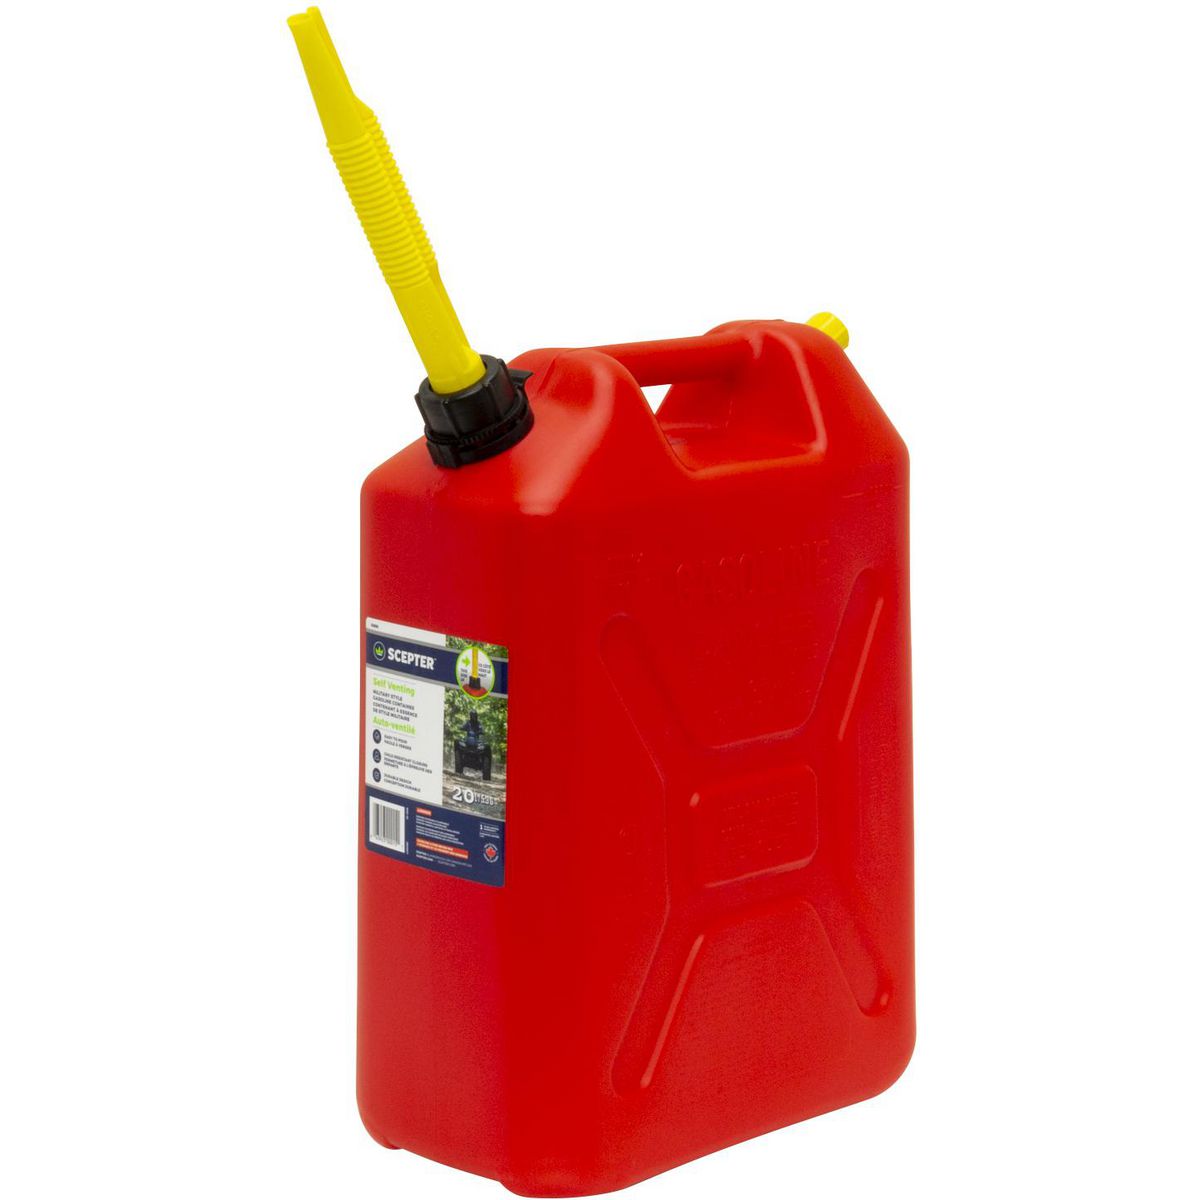 Scpeter 20L Red Plastic Fuel Jerry Can